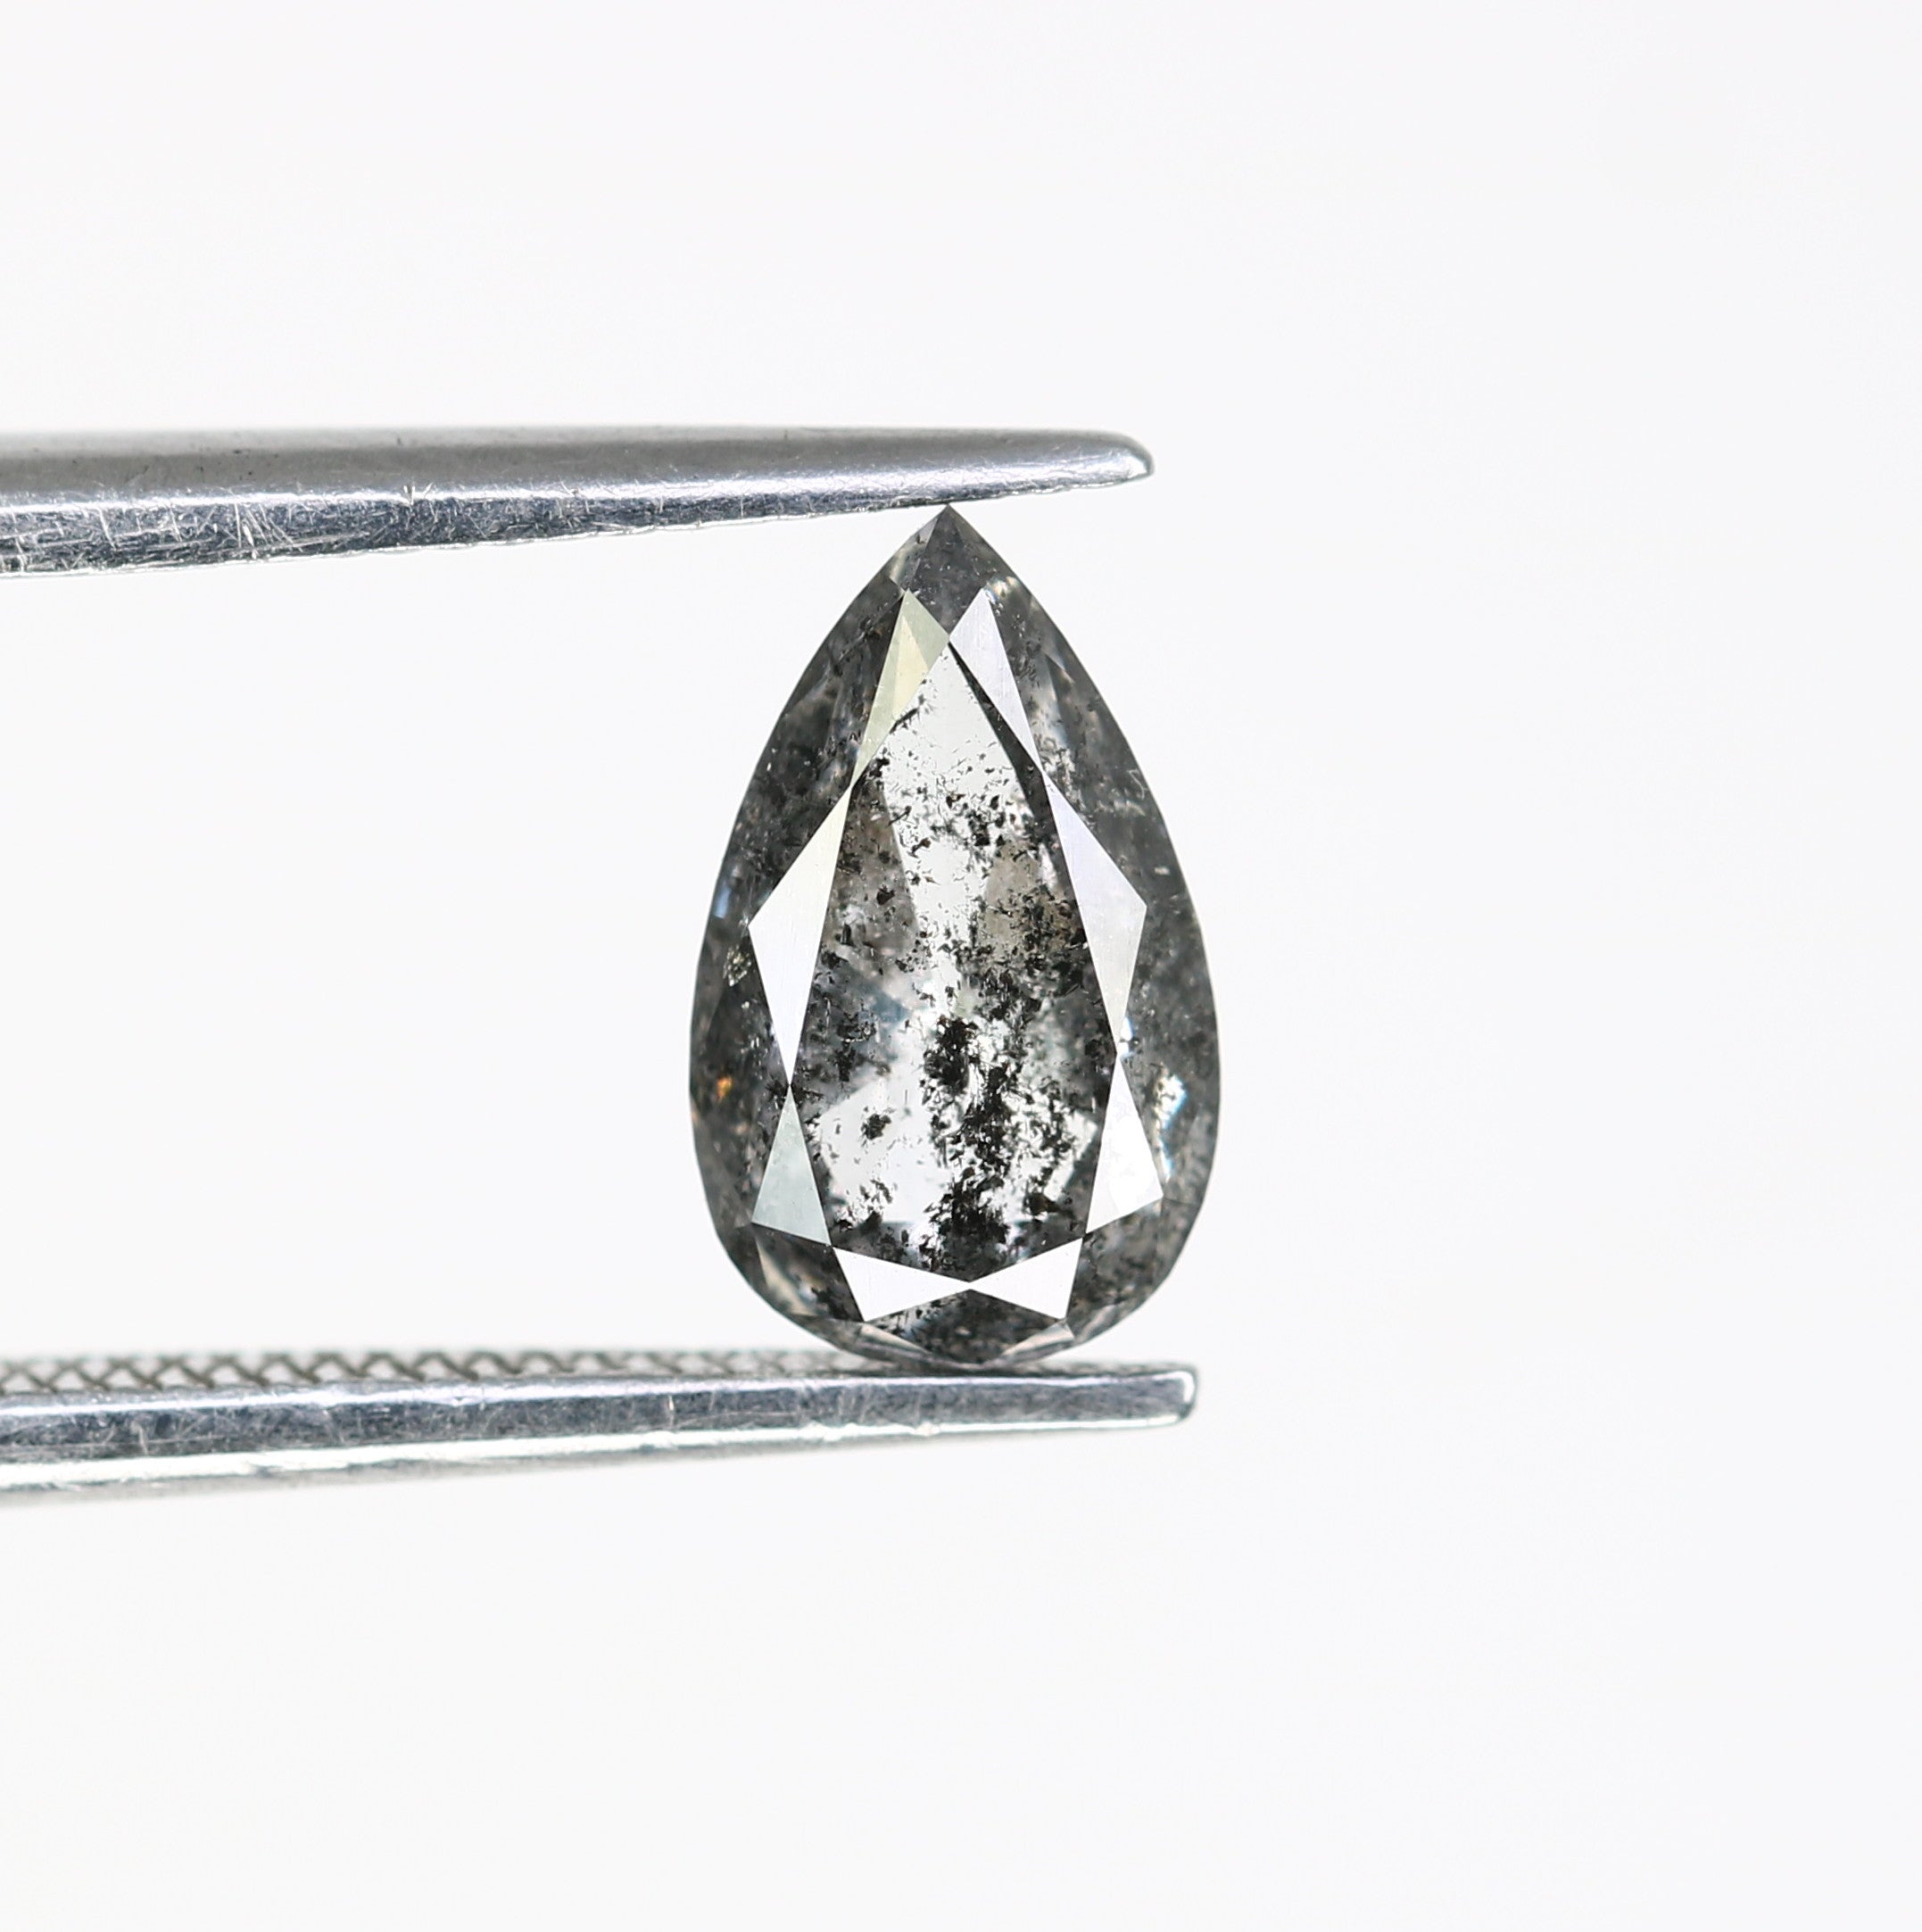 Loose Pear Cut Diamond 1.22 Carat Natural Salt And Pepper Diamond For Engagement Ring